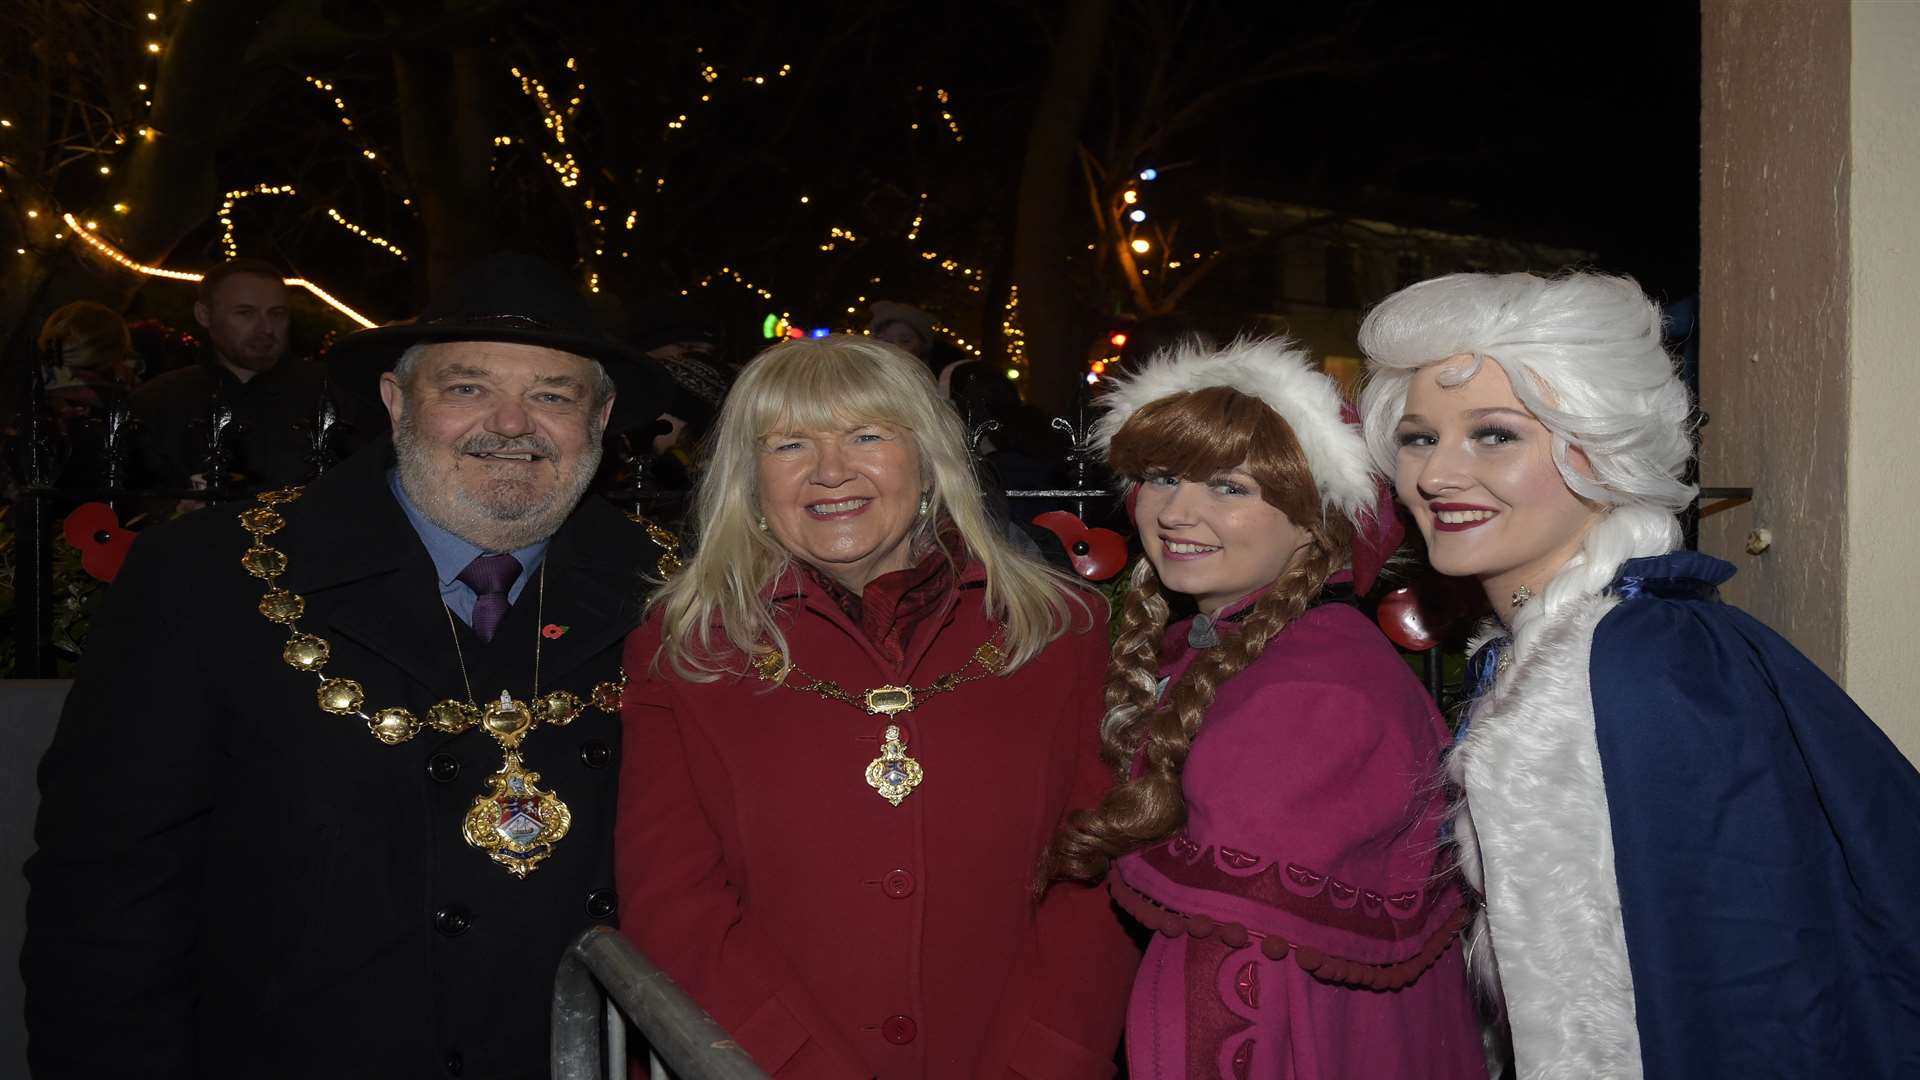 Mayor Peter Shaw with wife Frances, and Frozen's Anna and Elsa